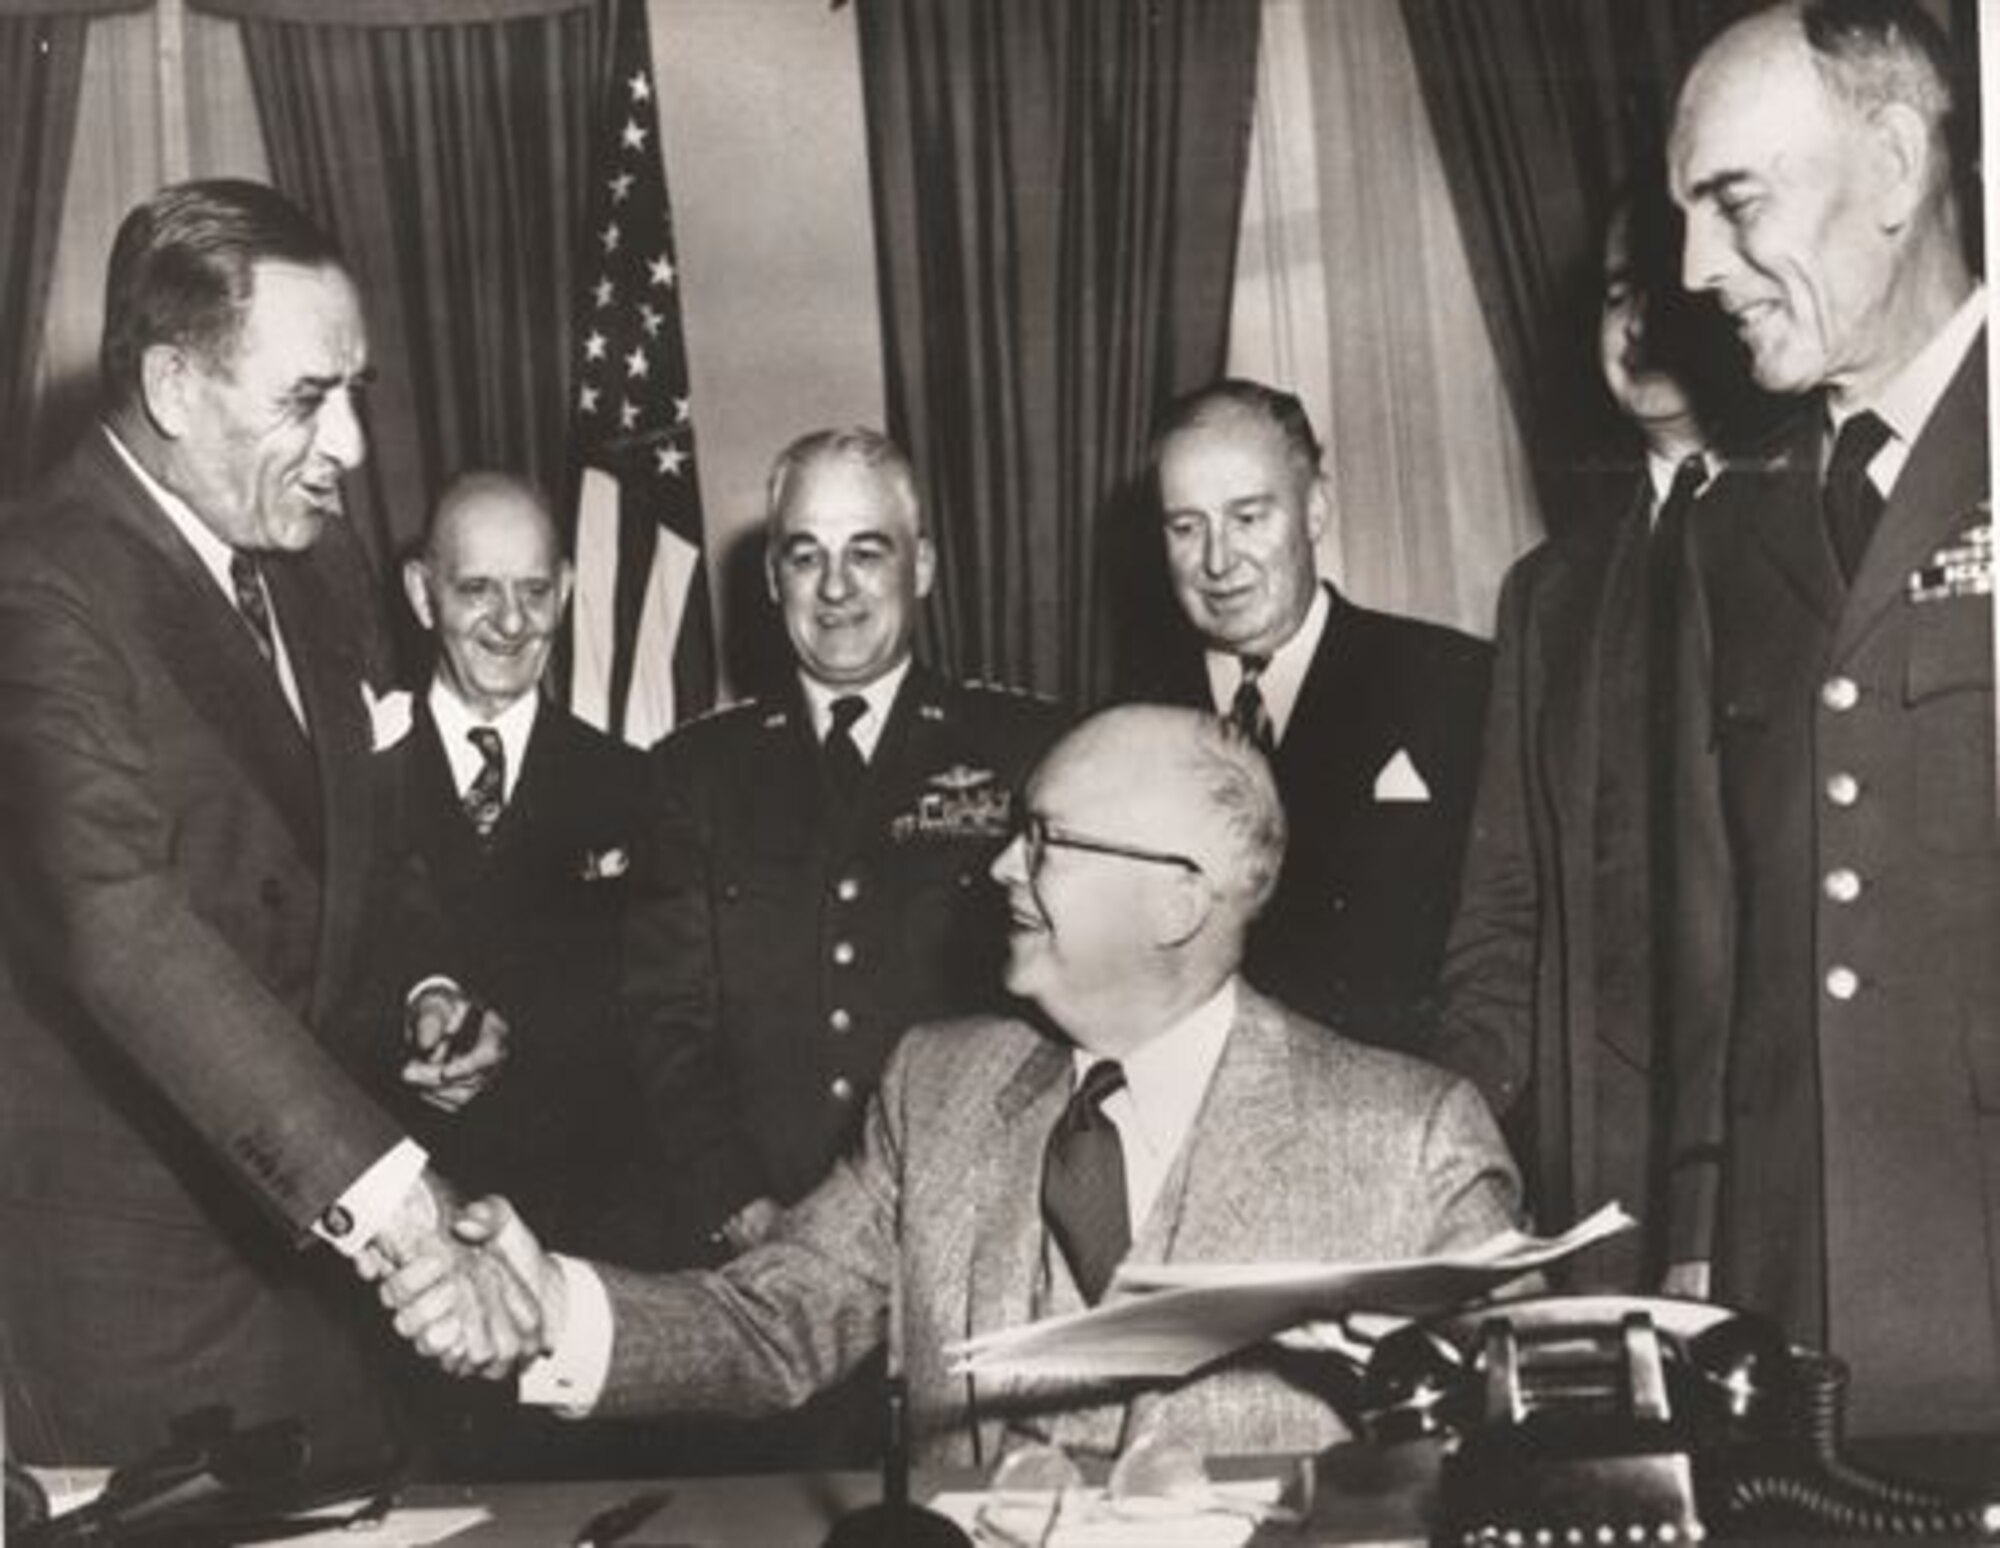 President Dwight Eisenhower (seated) shakes hands with Secretary of the Air Force Harold Talbott, April 1, 1954, after signing legislation authorizing the establishment of the U.S. Air Force Academy. Looking on (from left) are Congressman Karl Vinton, of Georgia; Gen. Nathan Twining, Air Force chief of staff; Congressman Dewey Short, chairman of the House Armed Services Committee; James Douglas, undersecretary of the Air Force, and Lt. Gen. Hubert Harmon, special assistant for the Academy. Harmon was the first superintendent of the U.S. Air Force Academy. (U.S. Air Force Academy)